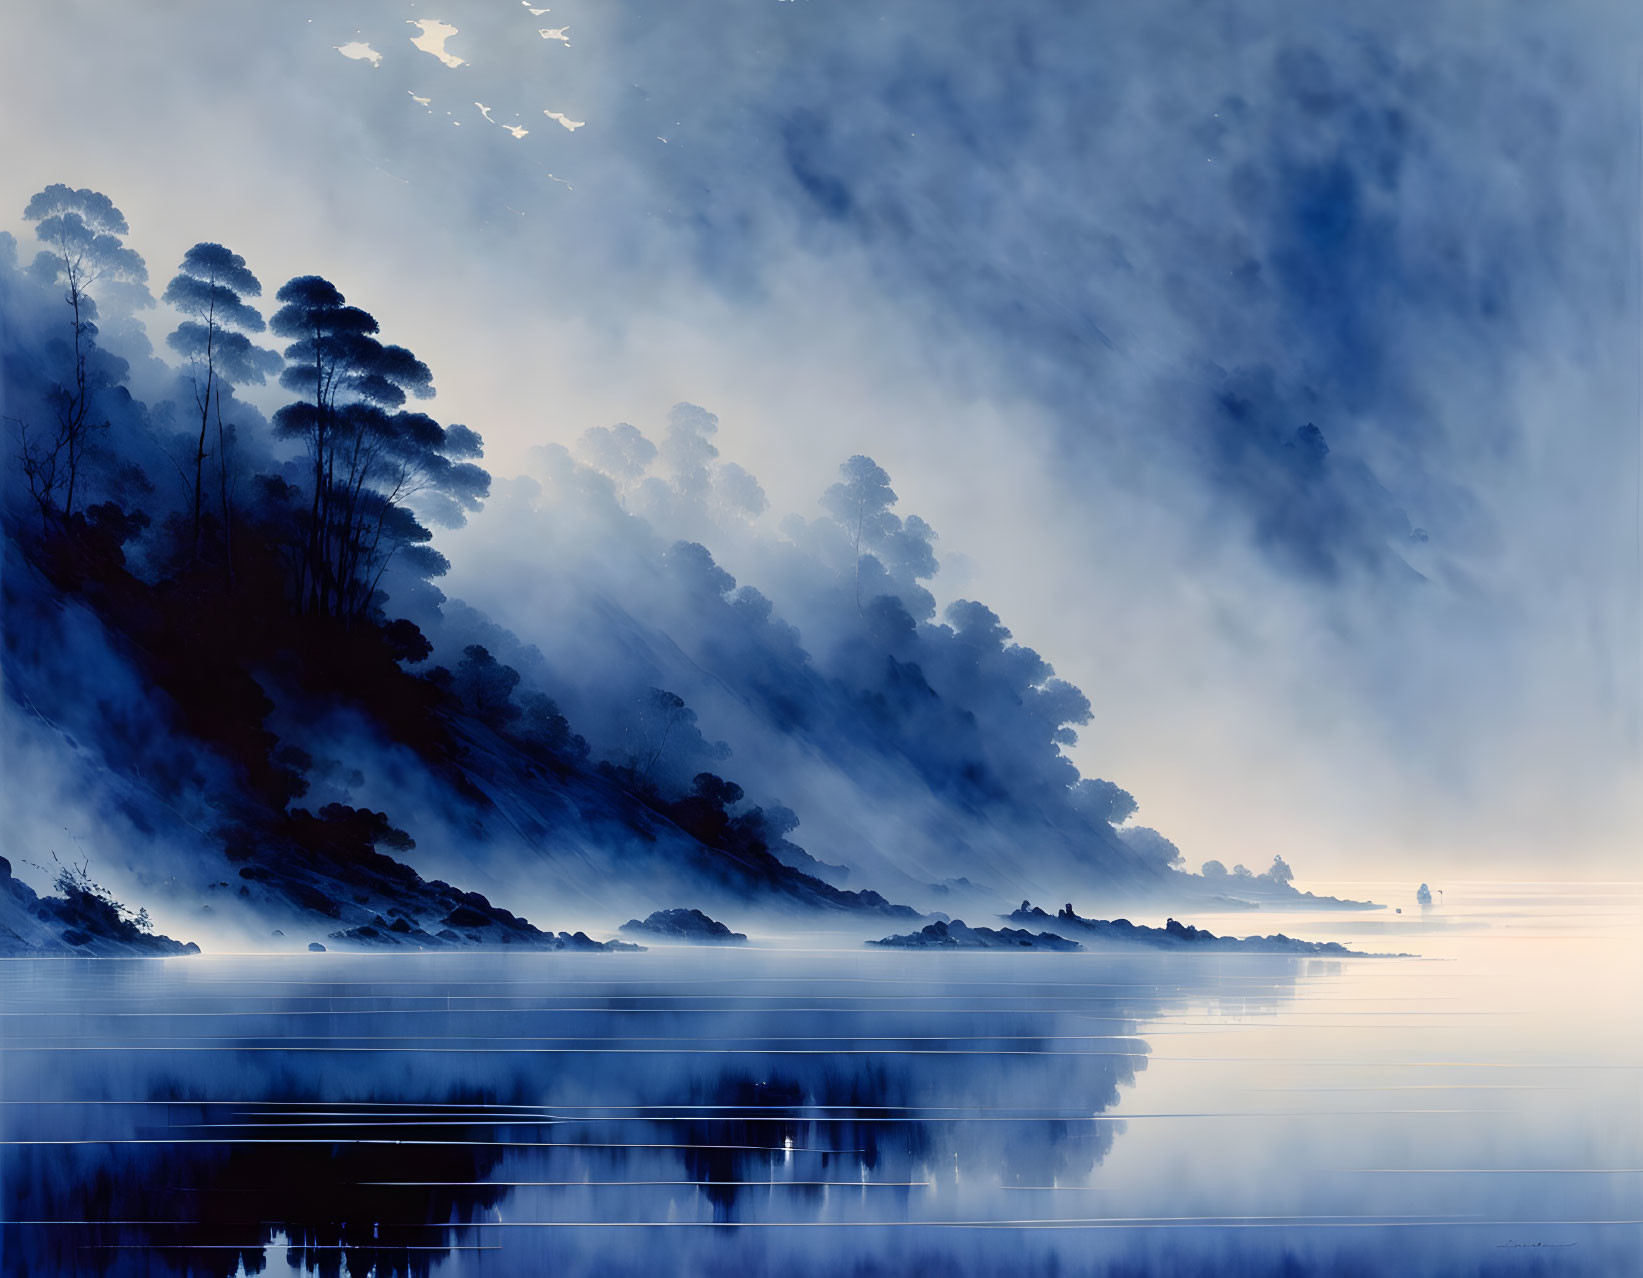 Tranquil blue landscape with misty hills and serene lake